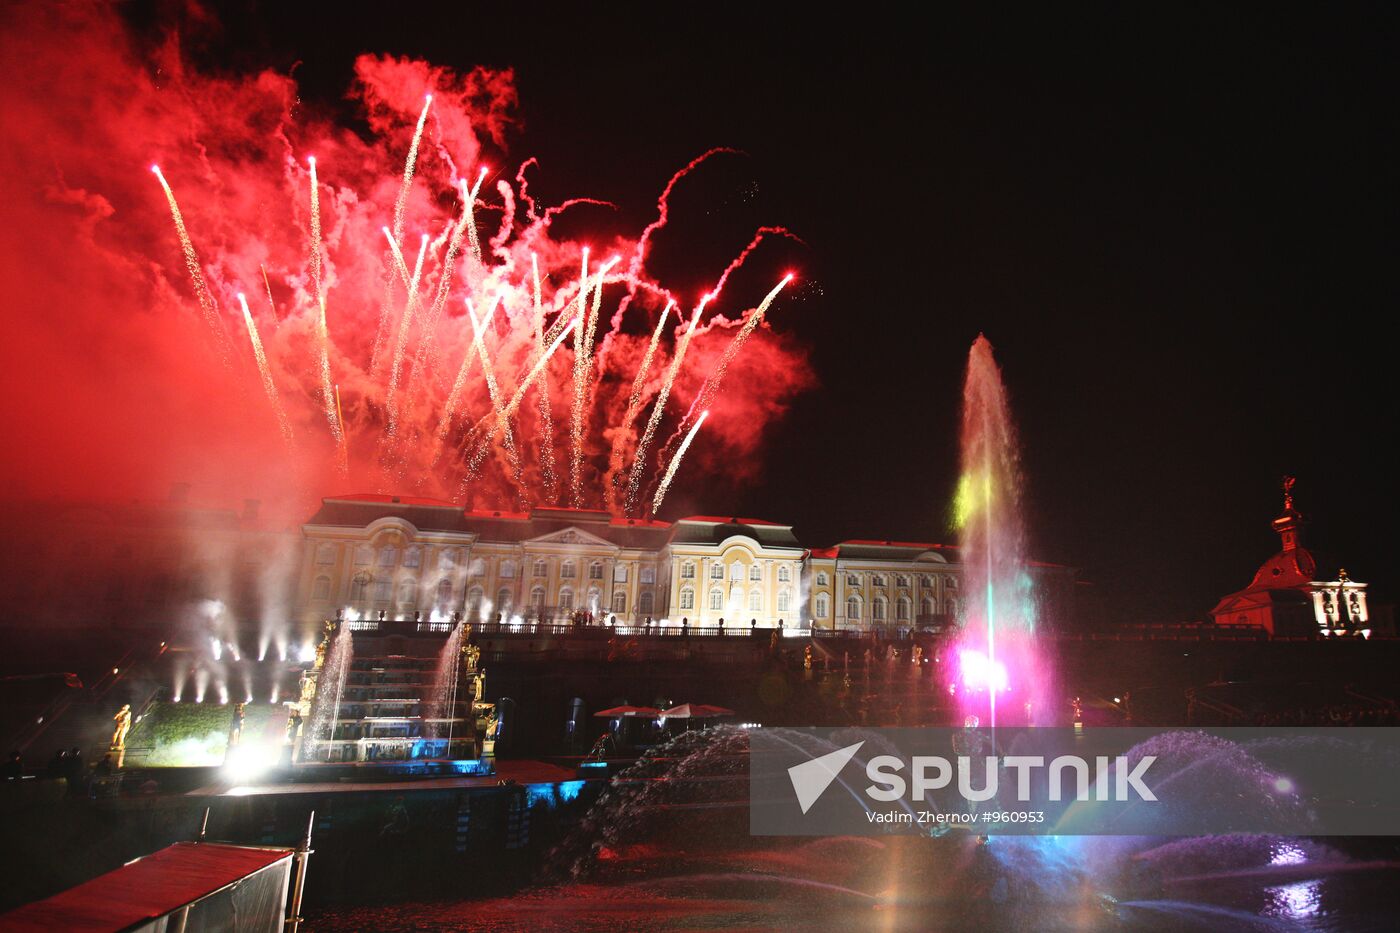 Ceremony of closing of fountains in Peterhof